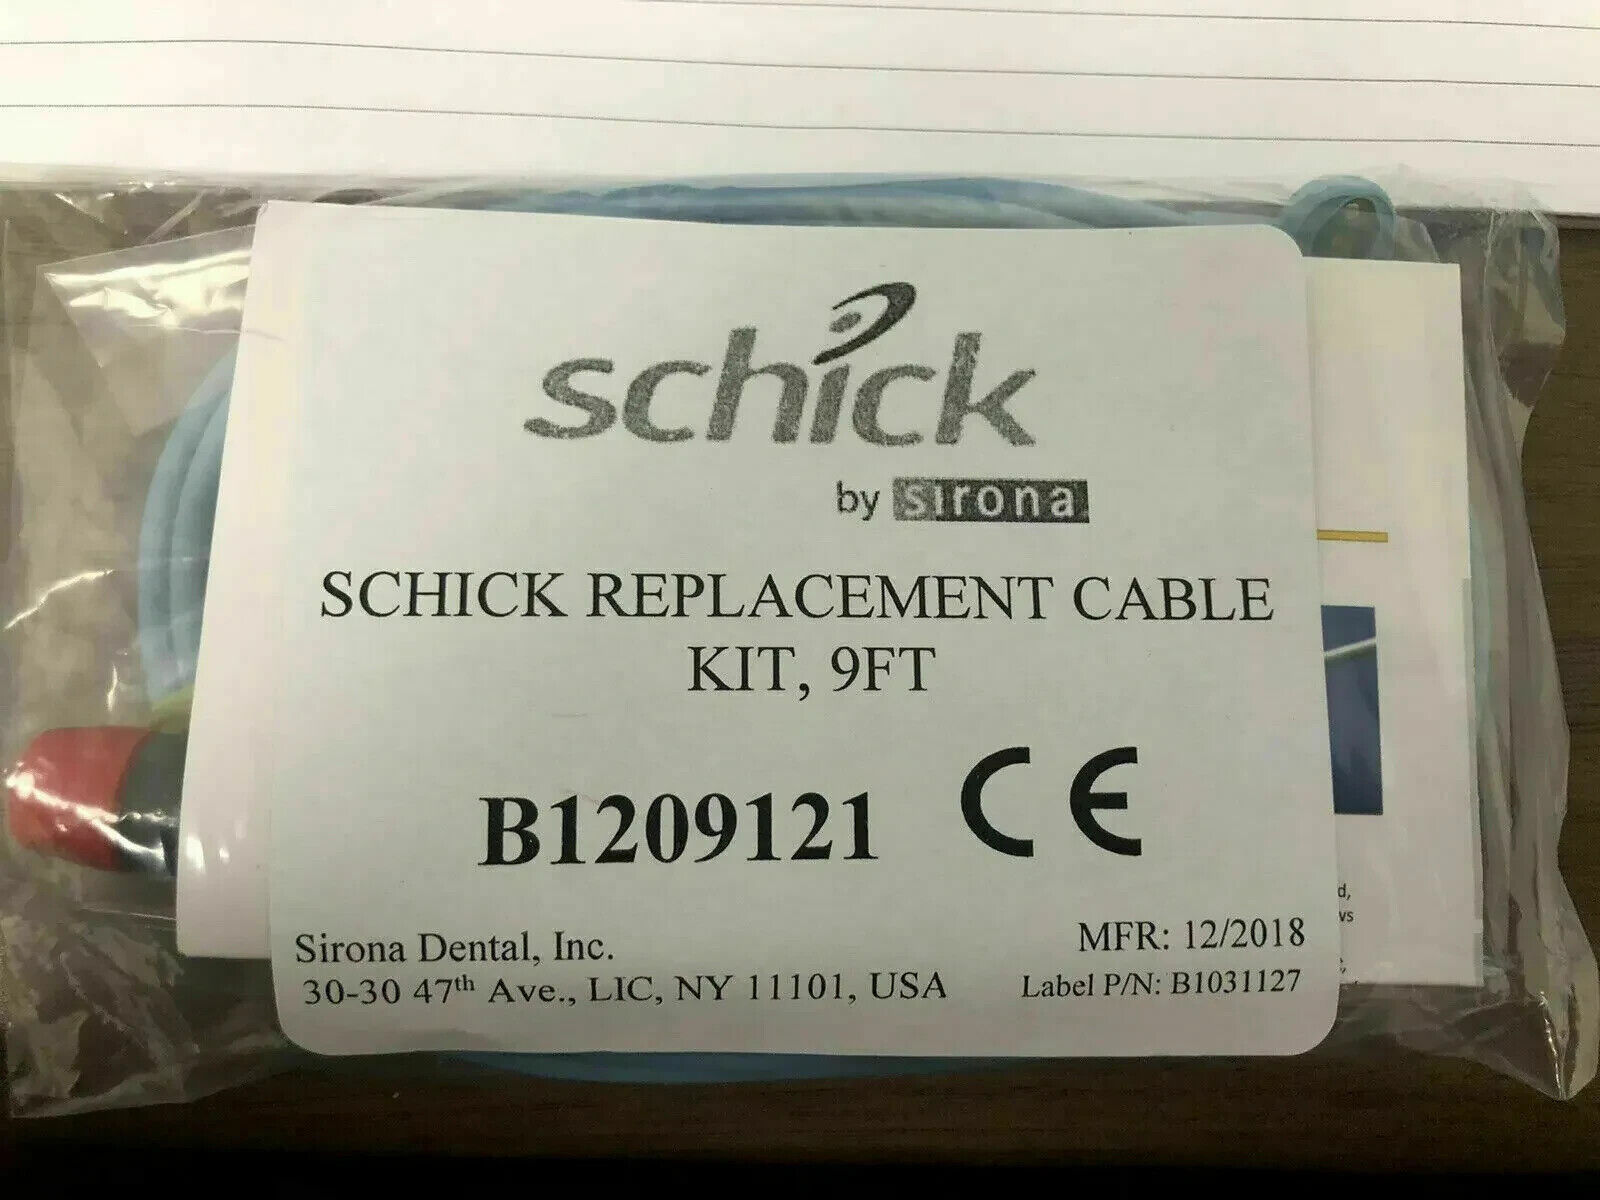 SCHICK Xios Sirona REPLACEMENT CABLE, 9 Foot 6404185 Fits Elite/33/select/Suprem